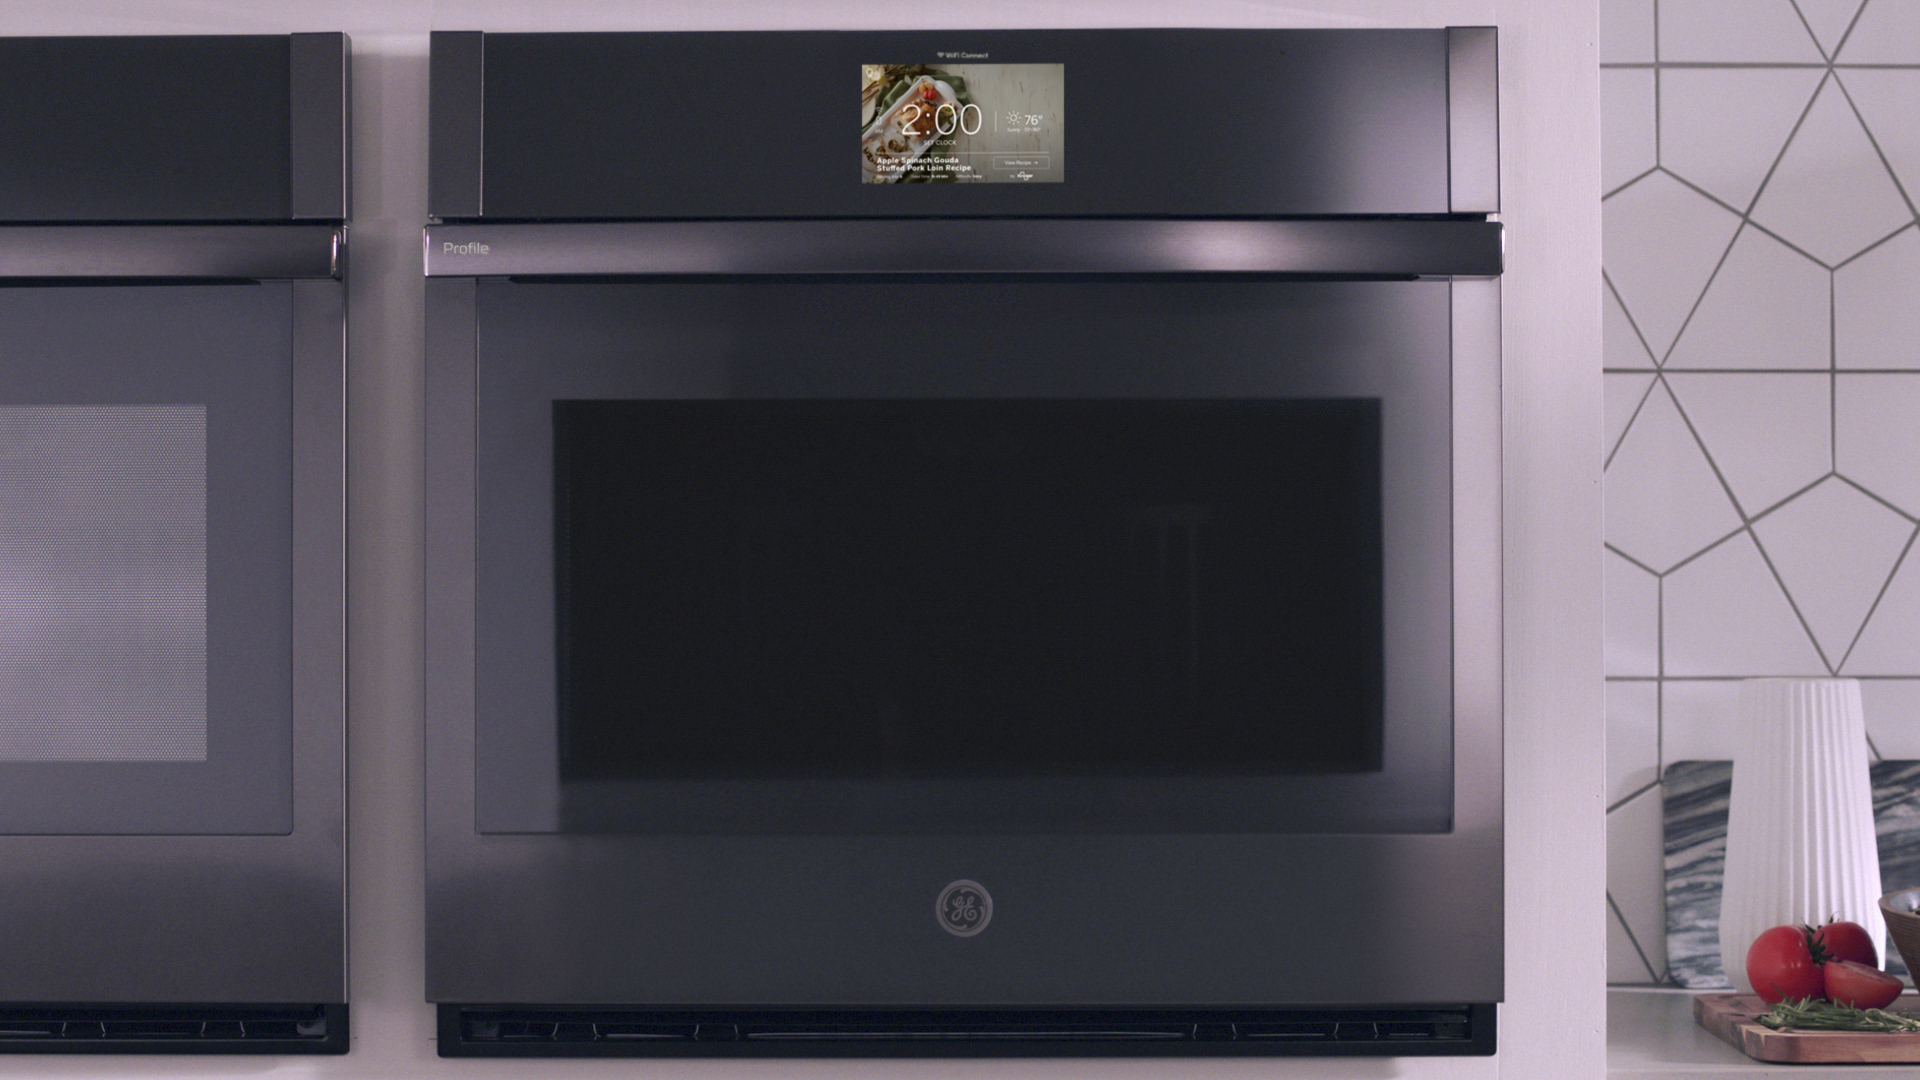 Does The Full-Size Oven Have a Place in the Modern Home?